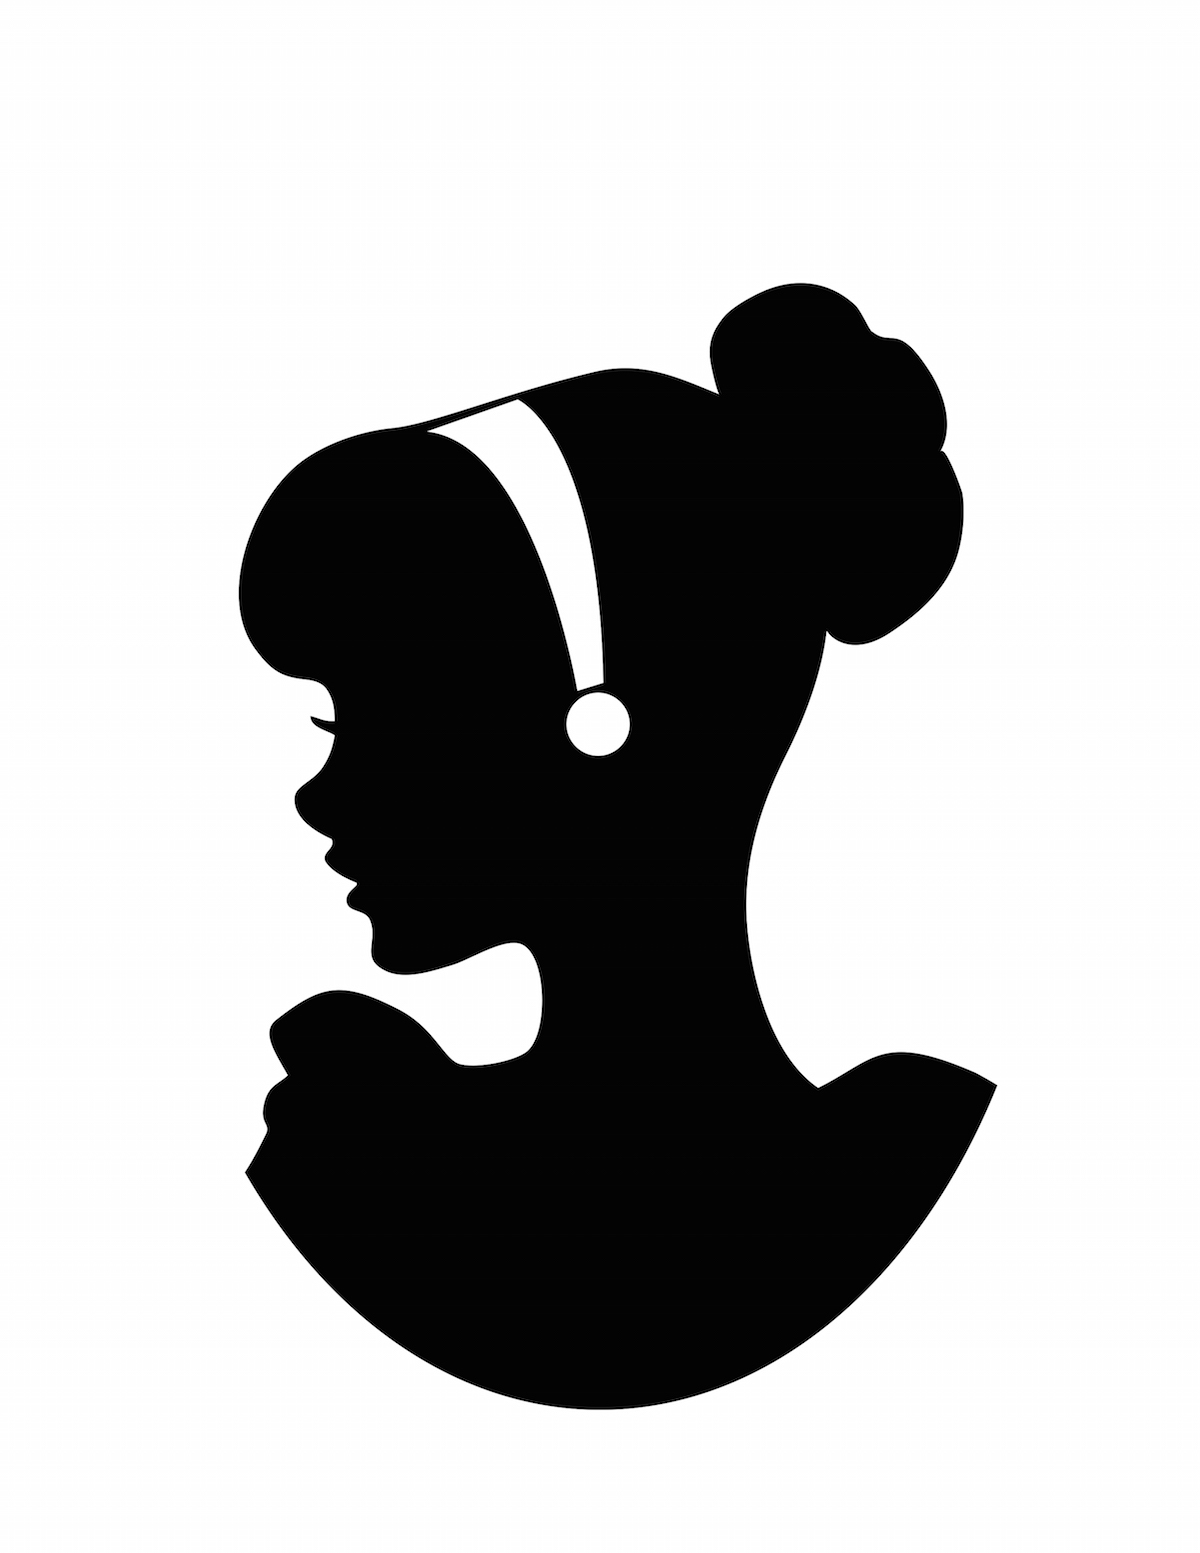 Download Prince And Princess Silhouette at GetDrawings.com | Free ...